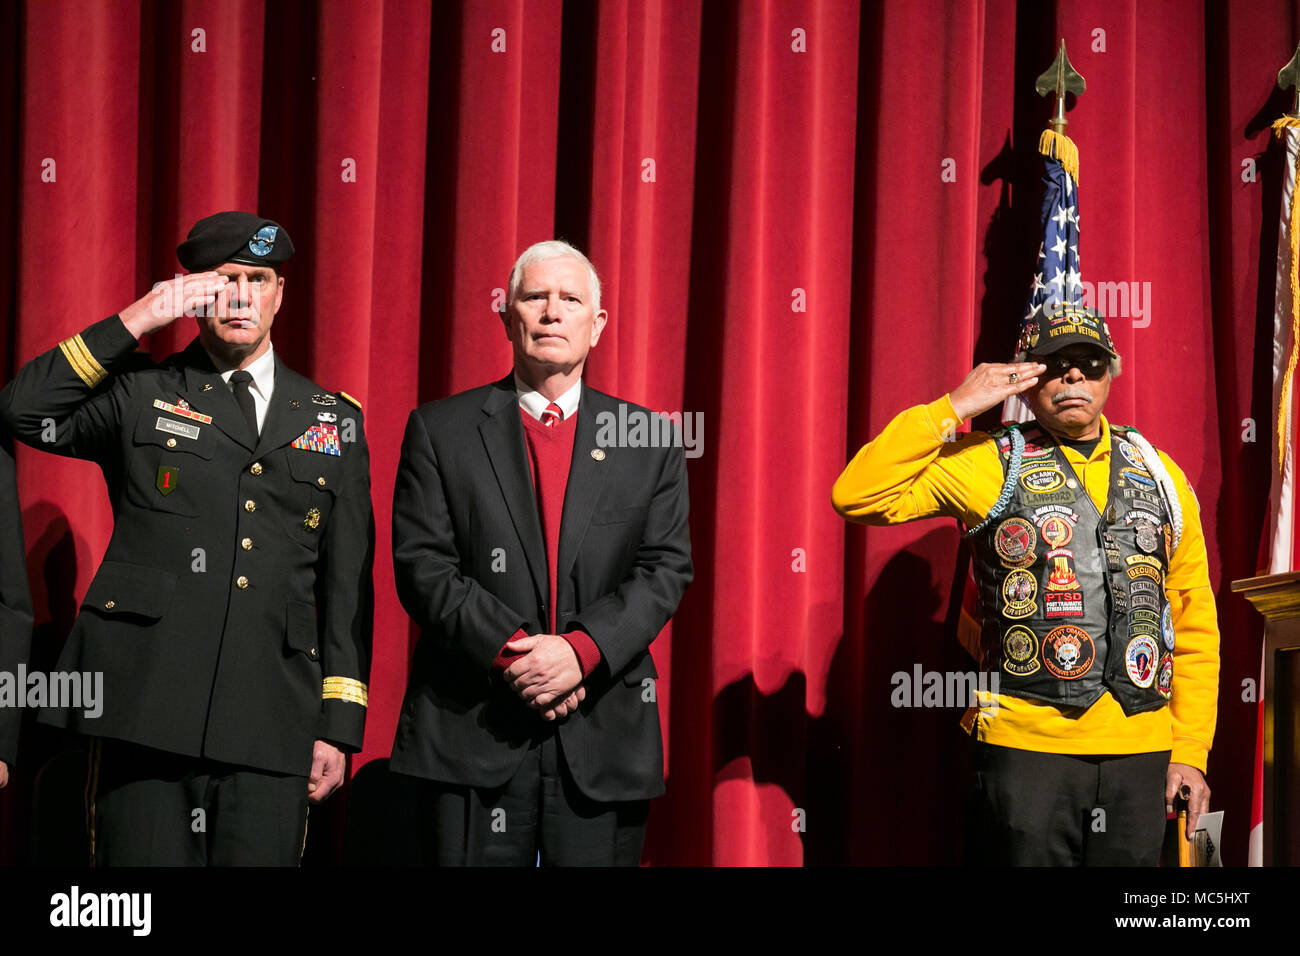 U.S. Army Maj. Gen. Daniel G. Mitchell, Army Materiel Command Deputy Chief of Staff for Logistics and Operations, G-3/4, salutes during the playing of TAPS at the 50th Anniversary Vietnam Veterans Celebration and 7th Annual Welcome Home Vietnam Veterans event in Huntsville, Alabama April 7, 2018. The event honored Vietnam Veterans as well as Korean War, World War II, Gulf War, Iraq and Afghanistan veterans. (U.S. Army photo by Sgt. 1st Class Teddy Wade) Stock Photo